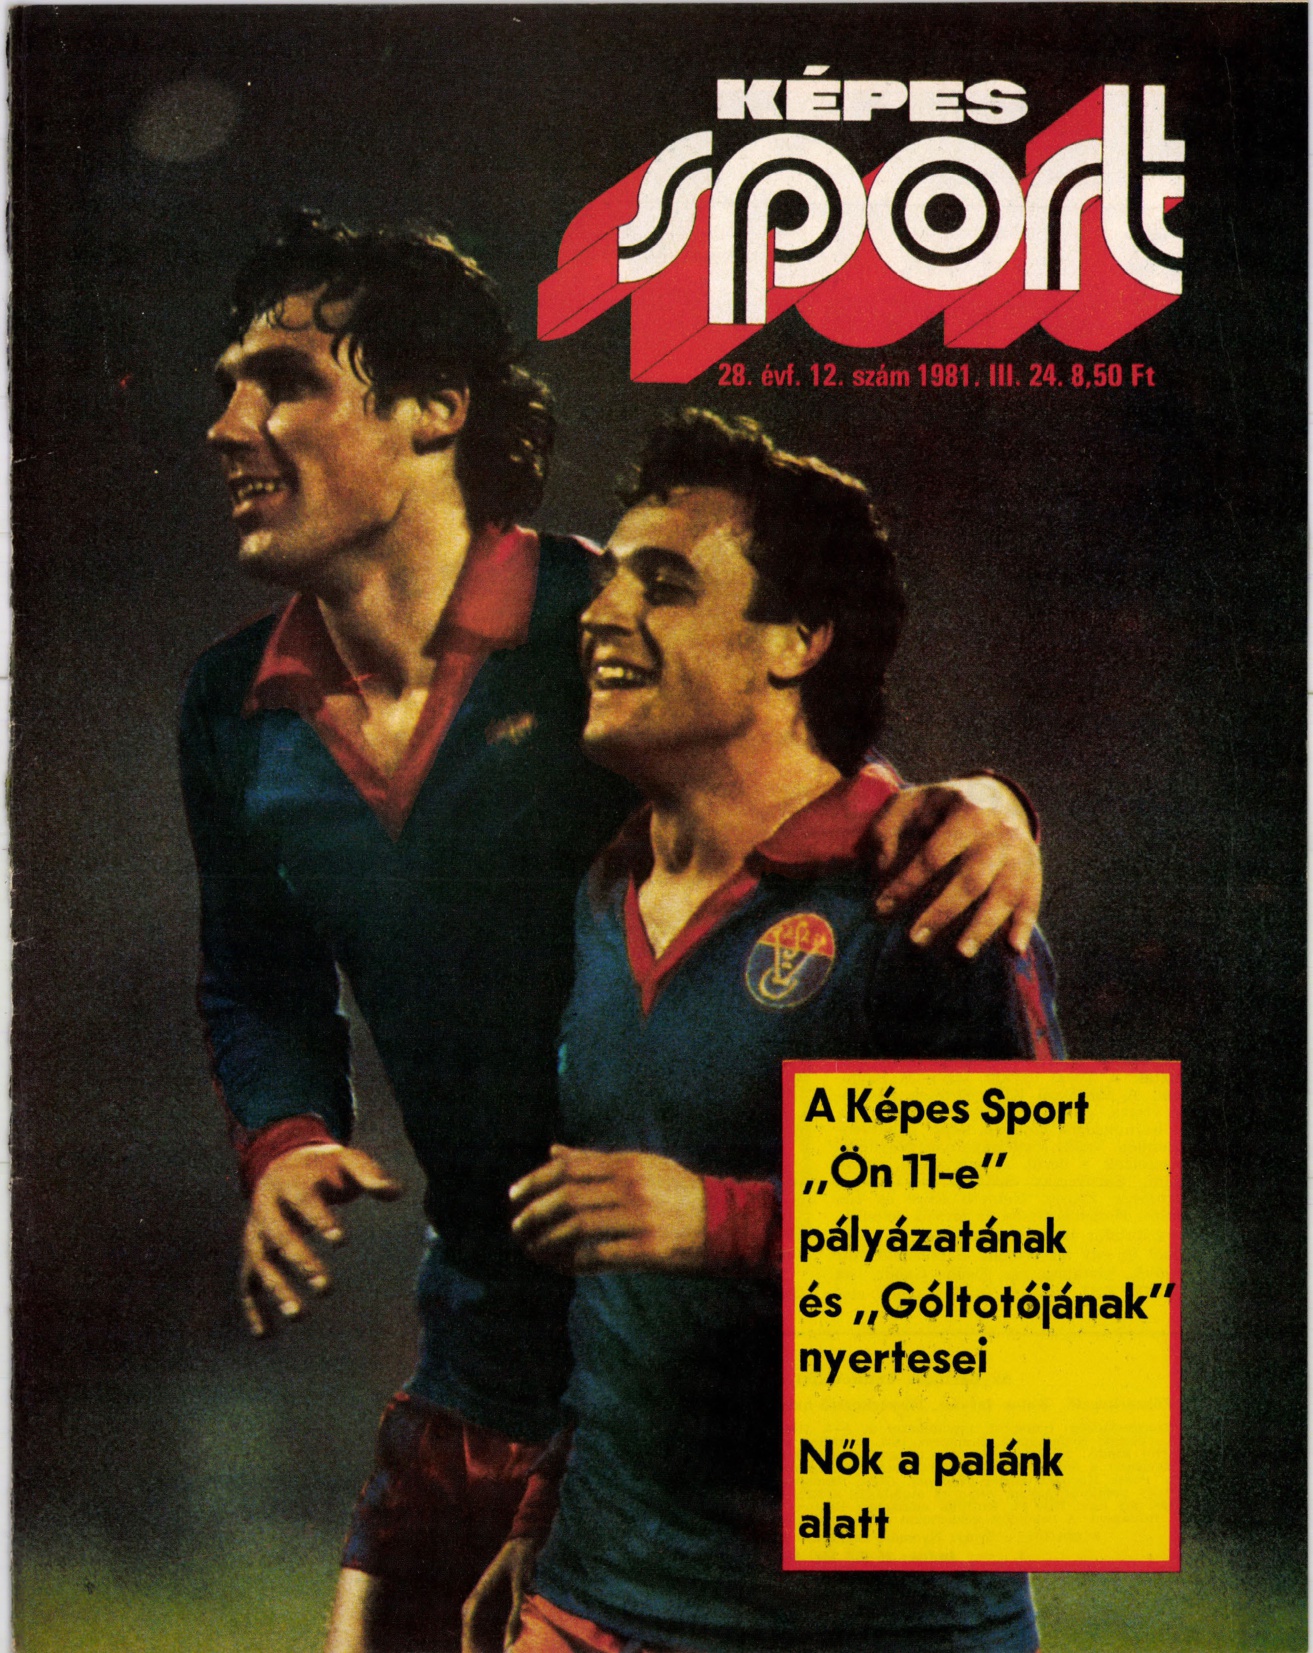 kepessport_1981_1_pages312-361-031.jpg